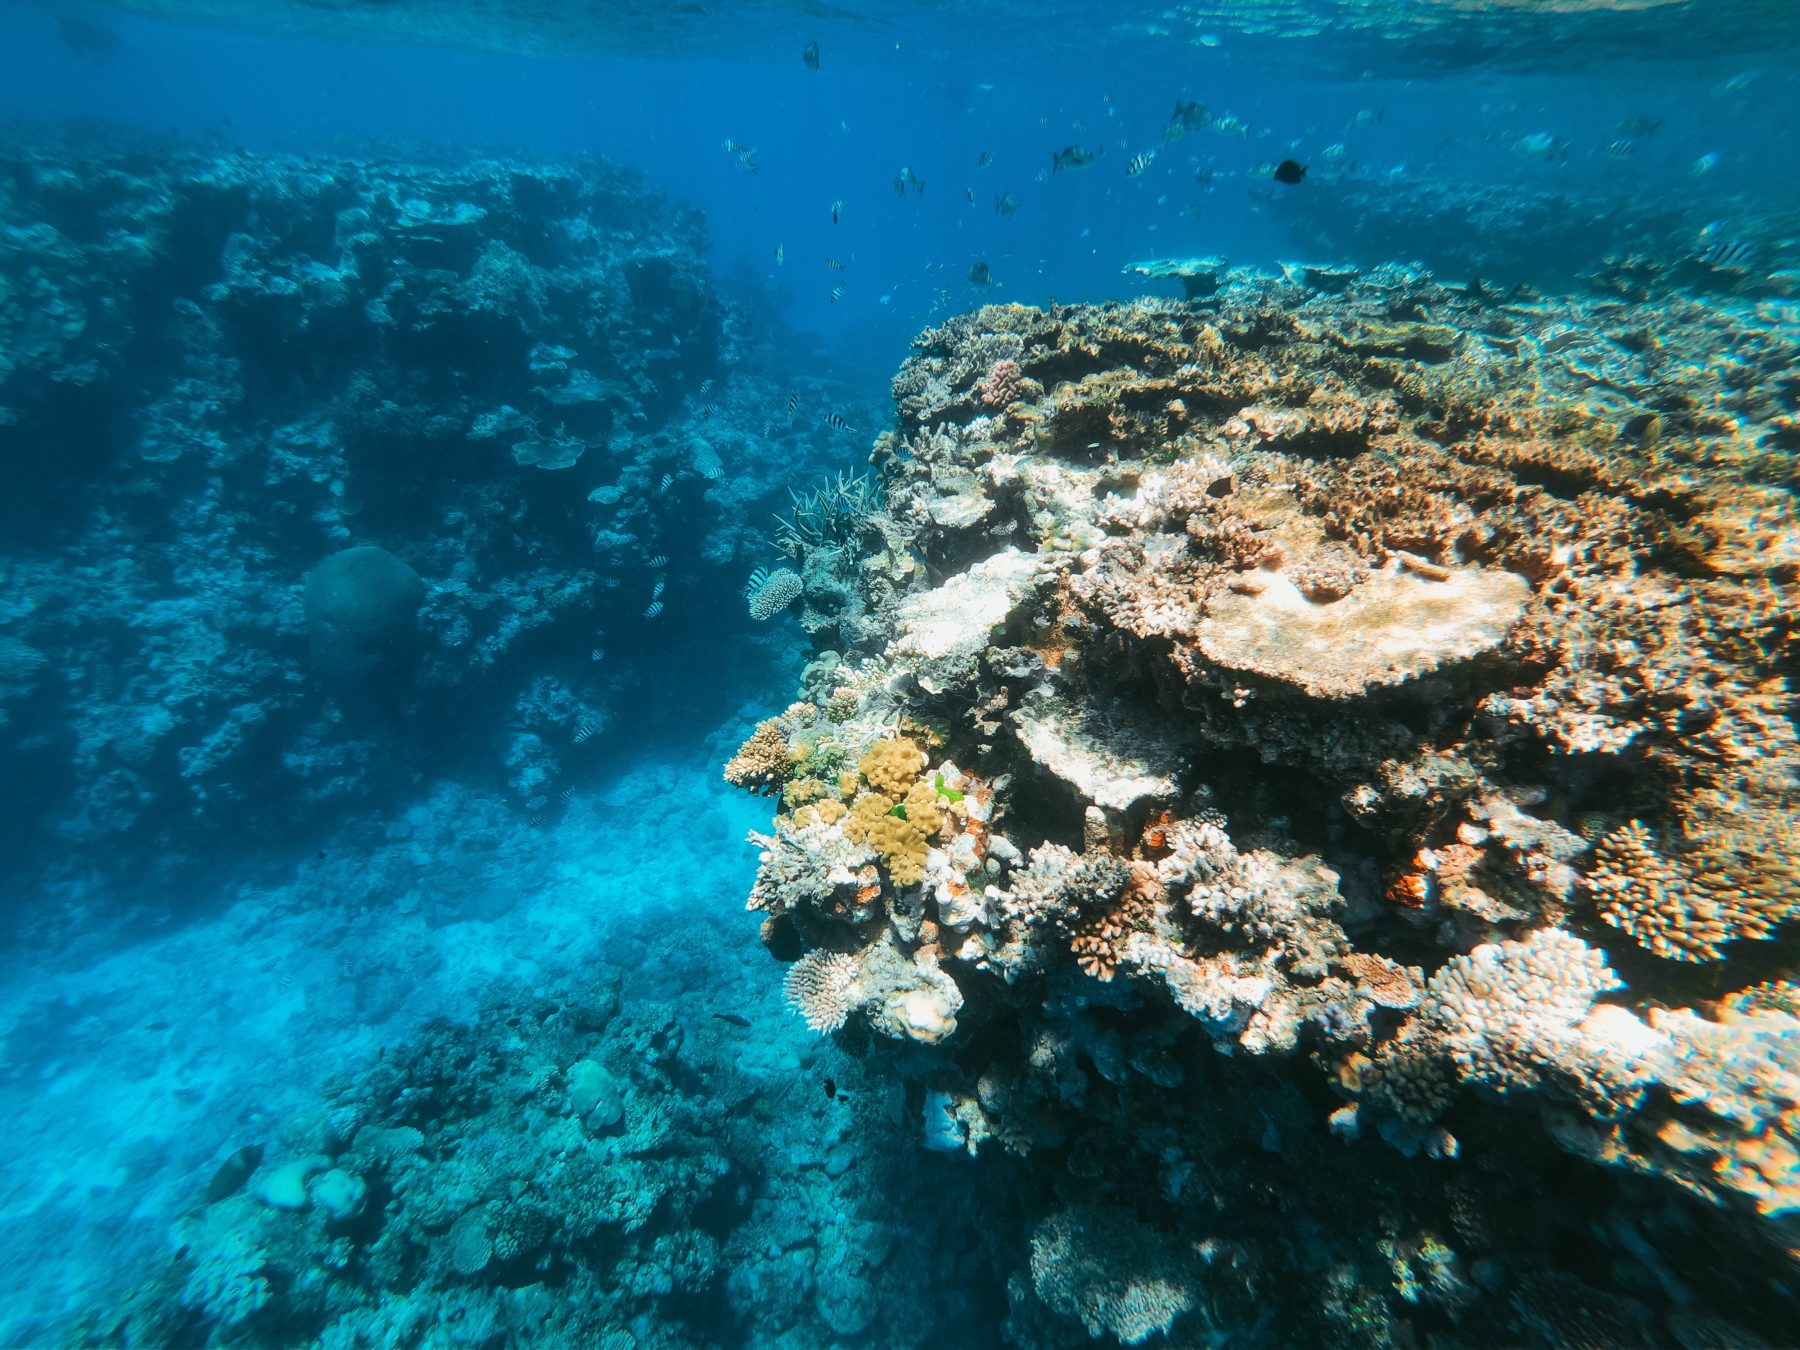 Underwater image of a coral reef